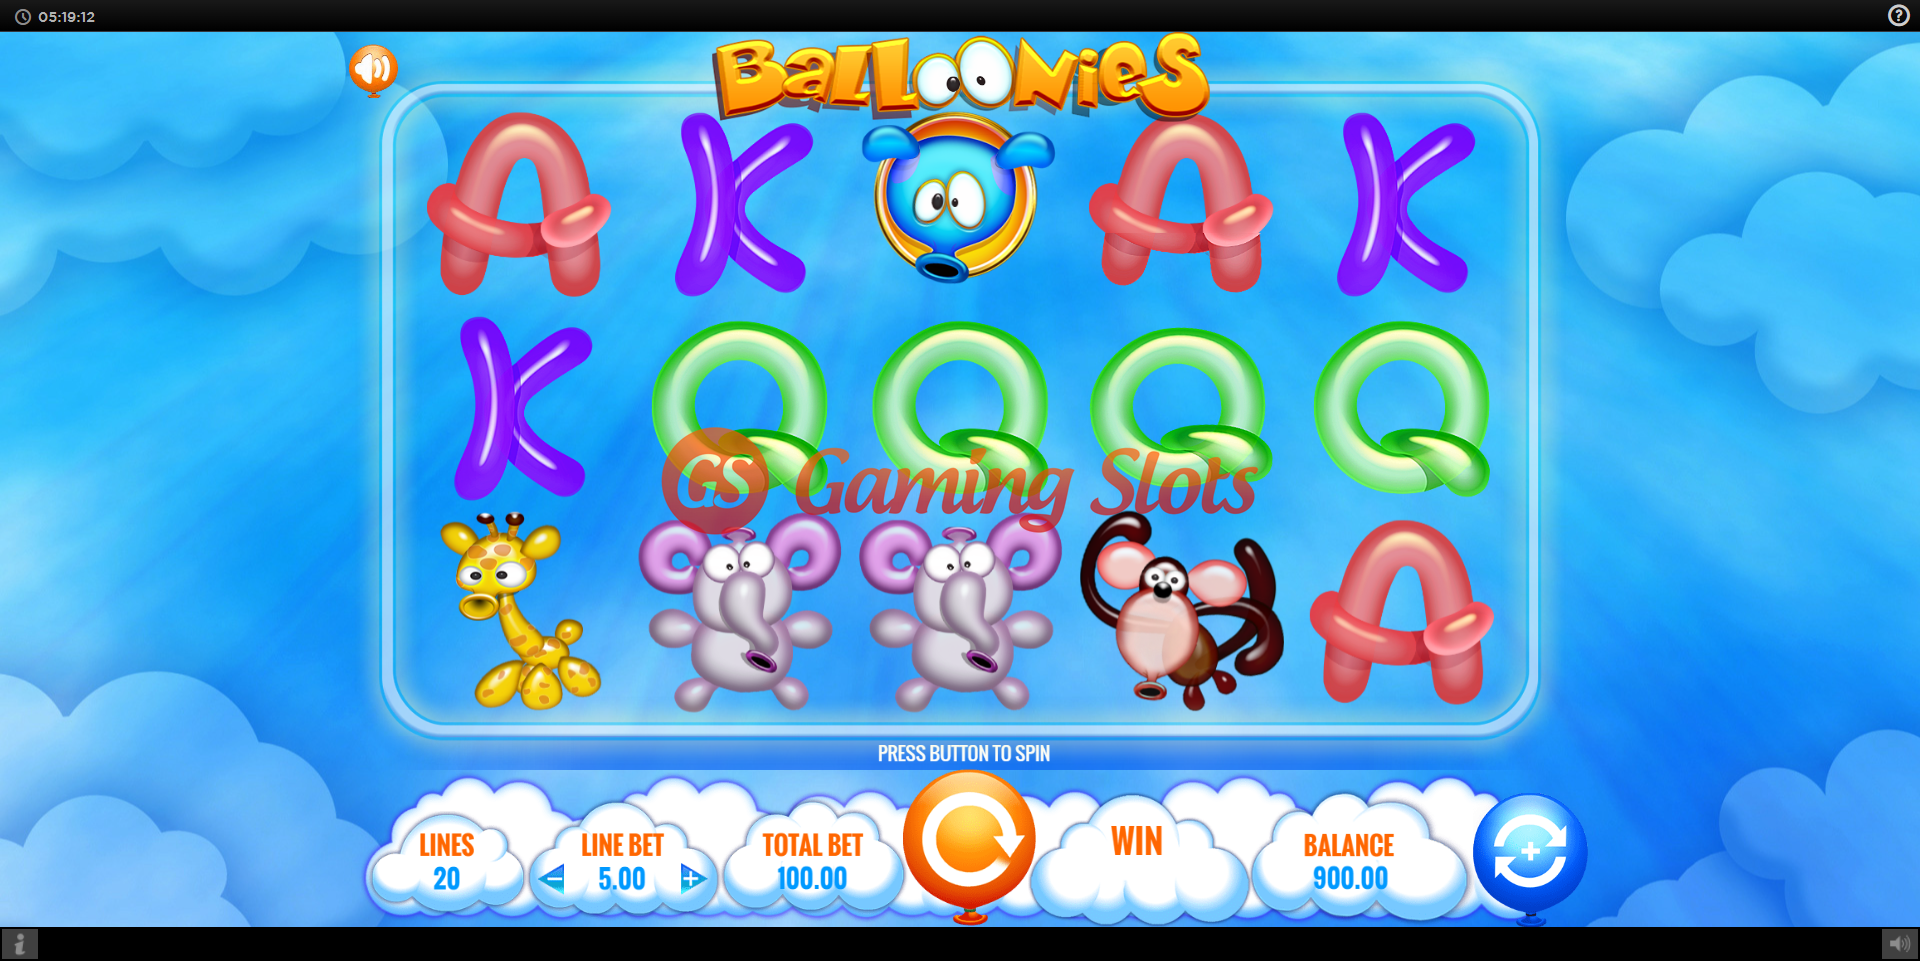 Base Game for Balloonies slot from IGT